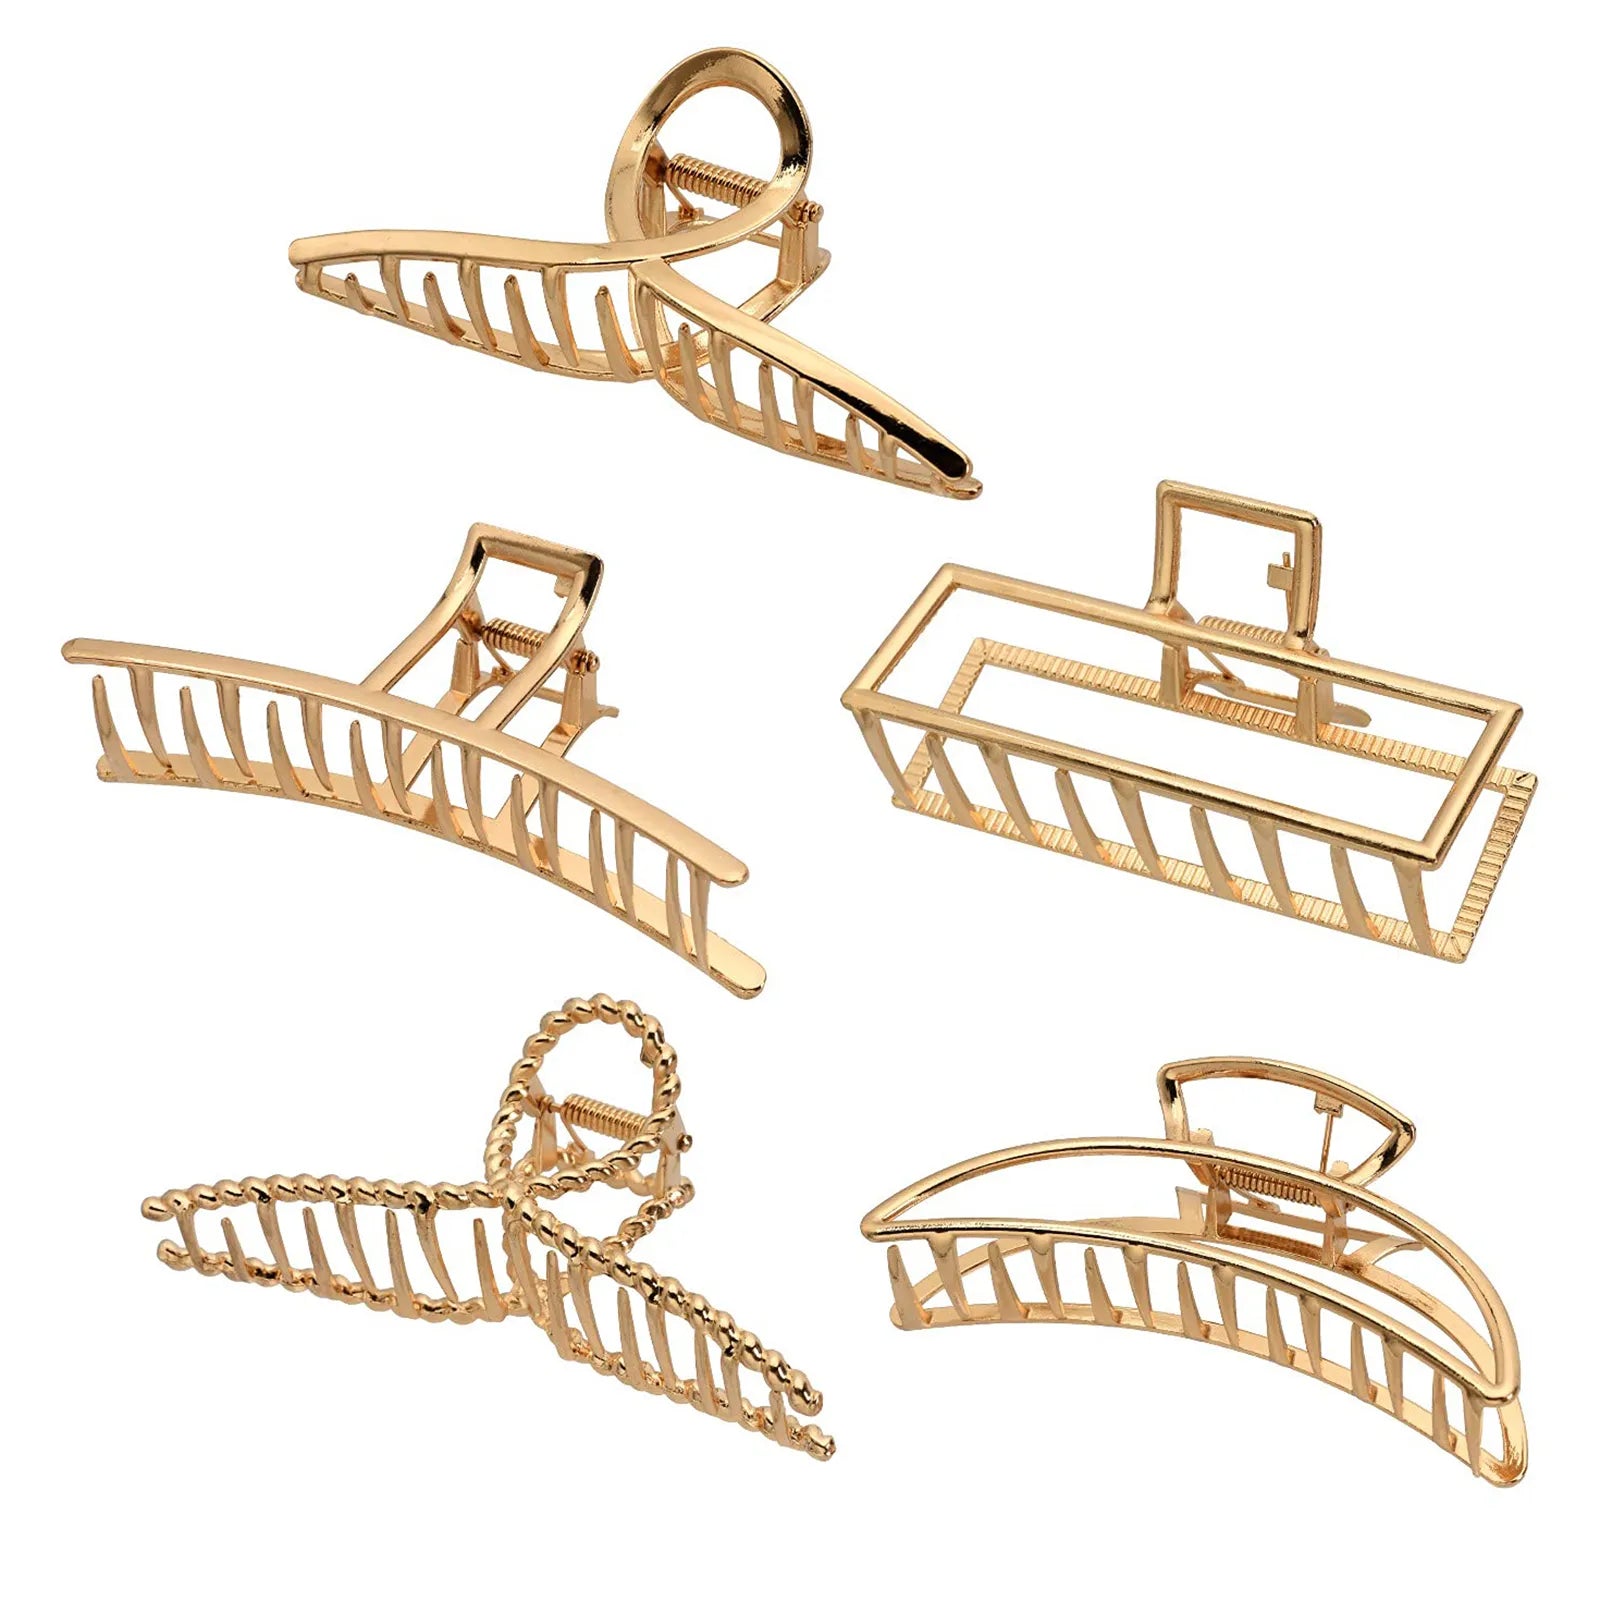 5 Pack large metal hair claw clips 4 inch big nonslip gold hair clamps hair accessories